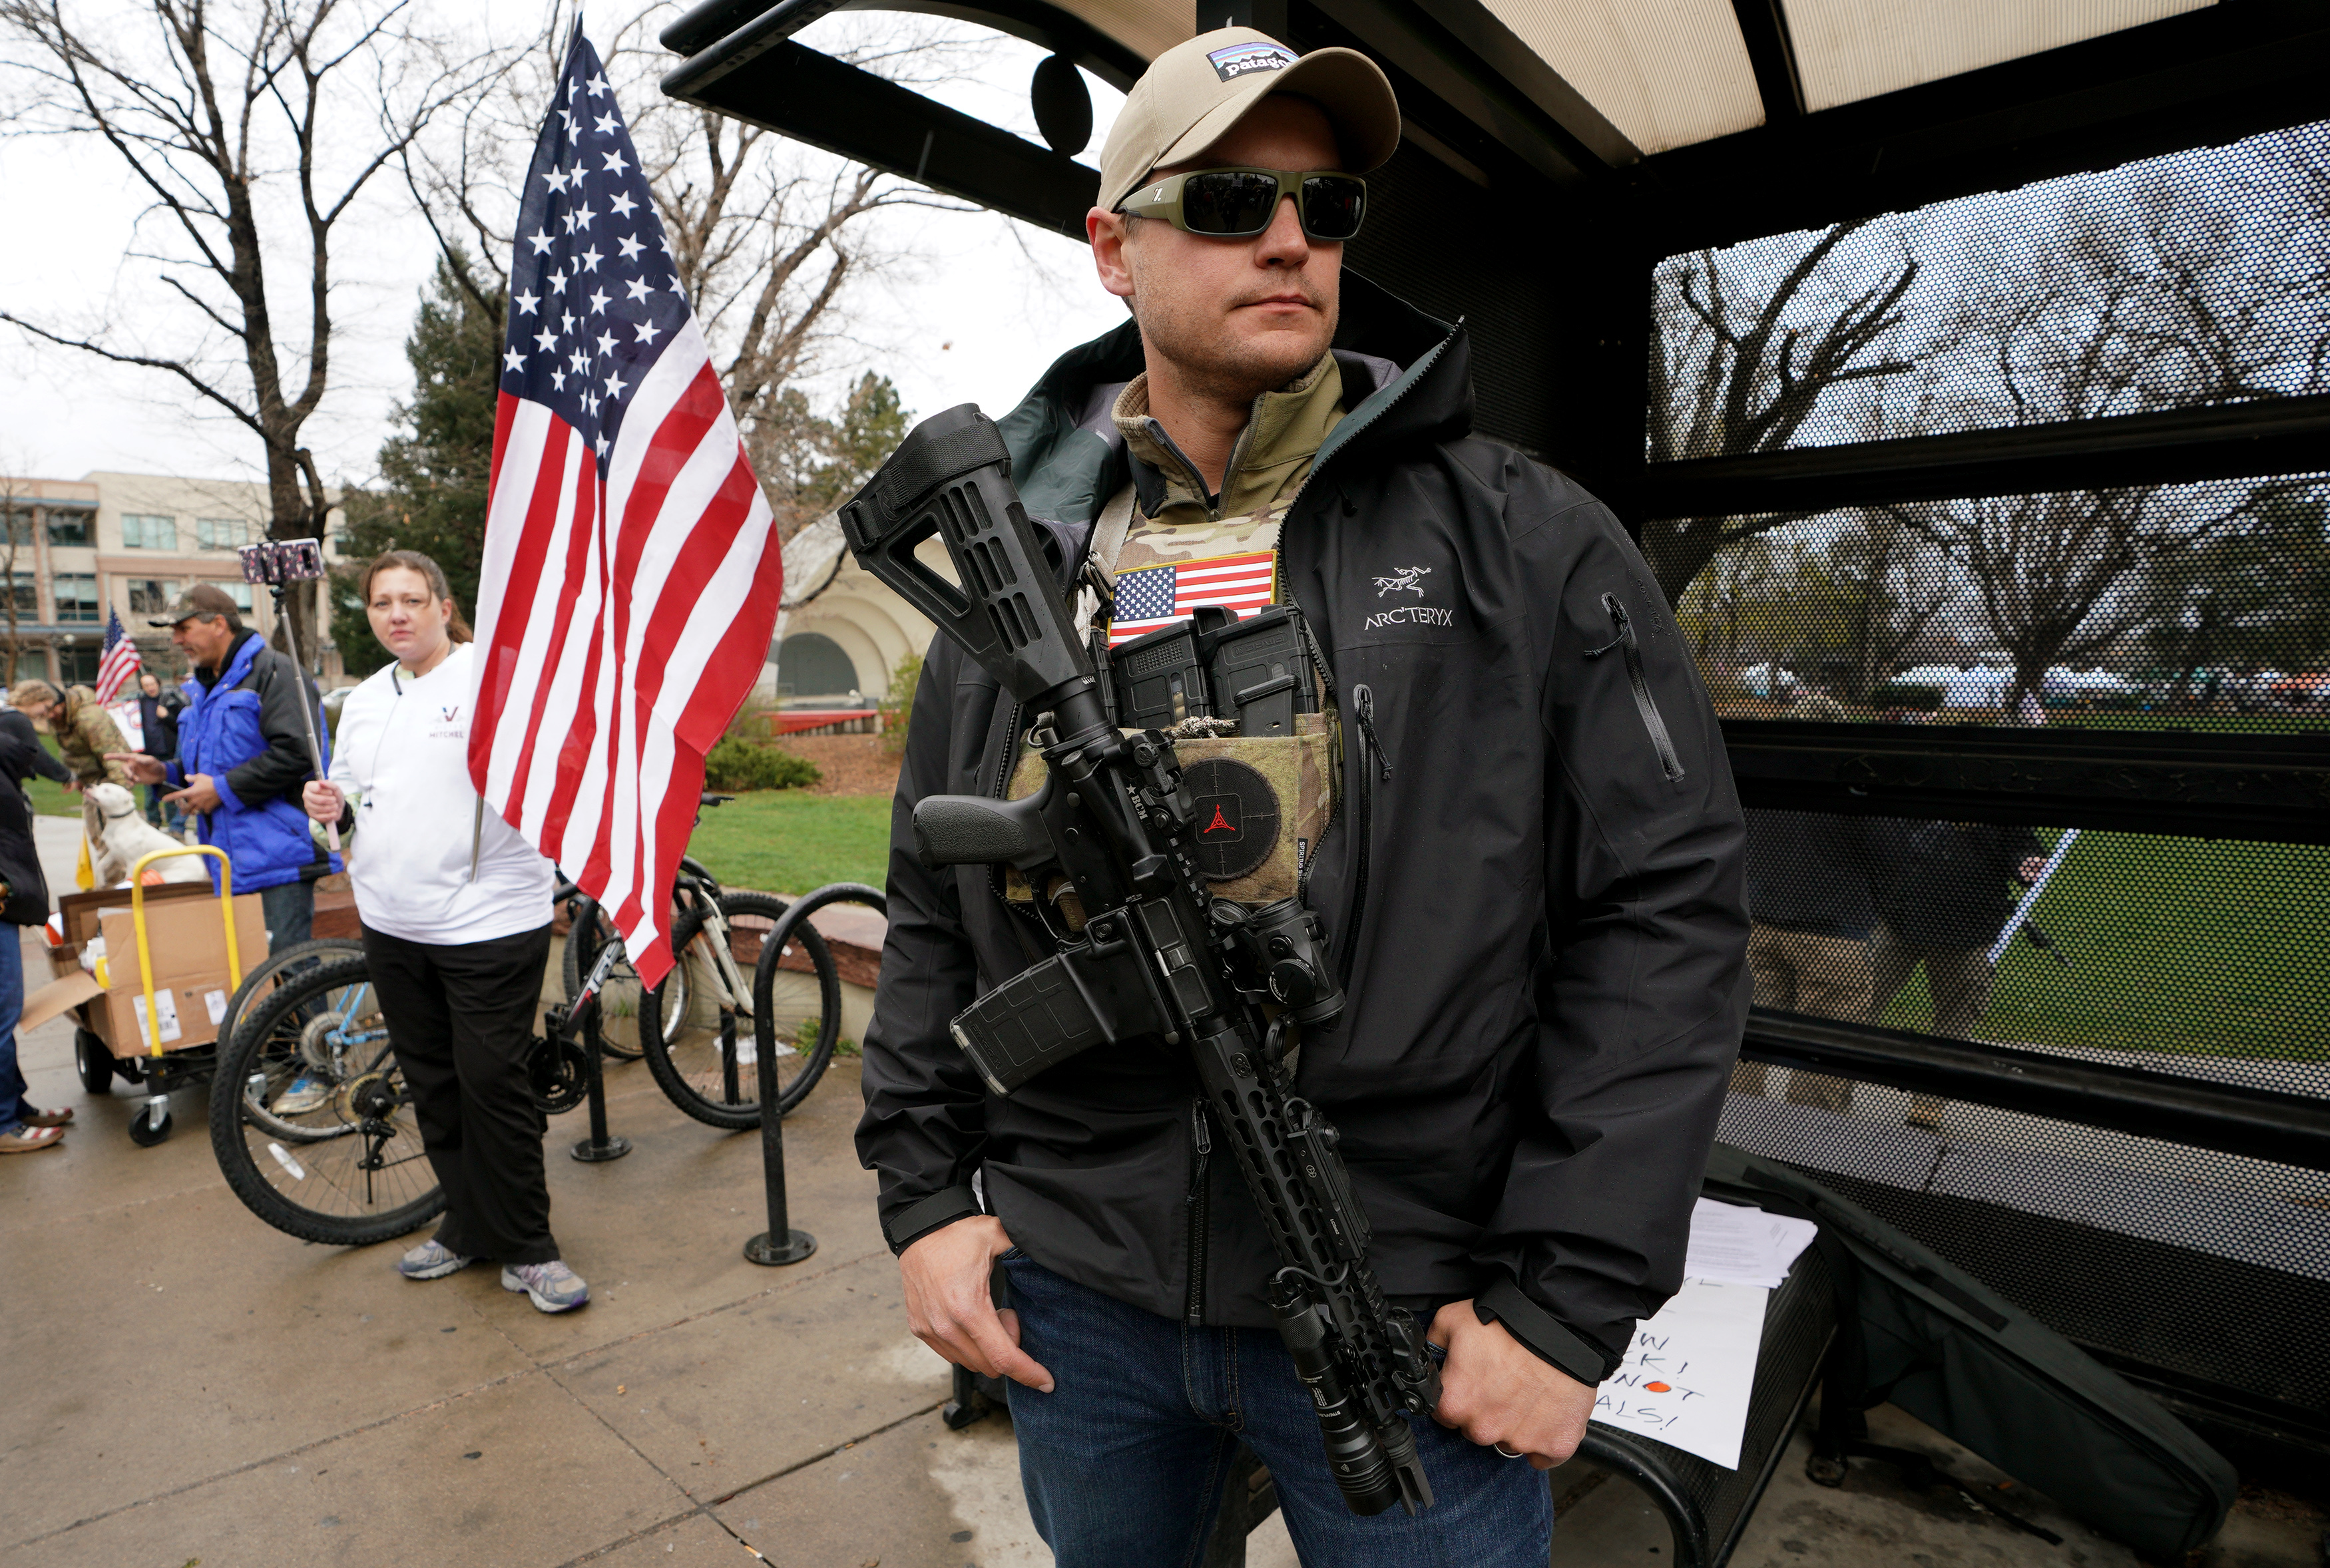 BOULDER, CO - APRIL 21: Marty Combs openly carries his AR-15 pistol at a pro gun rally on April 21, 2018 in Boulder, Colorado. The city of Boulder is considering enacting an ordinance that will ban the sale and possession of assault weapons in the city. (Photo by Rick T. Wilking/Getty Images)